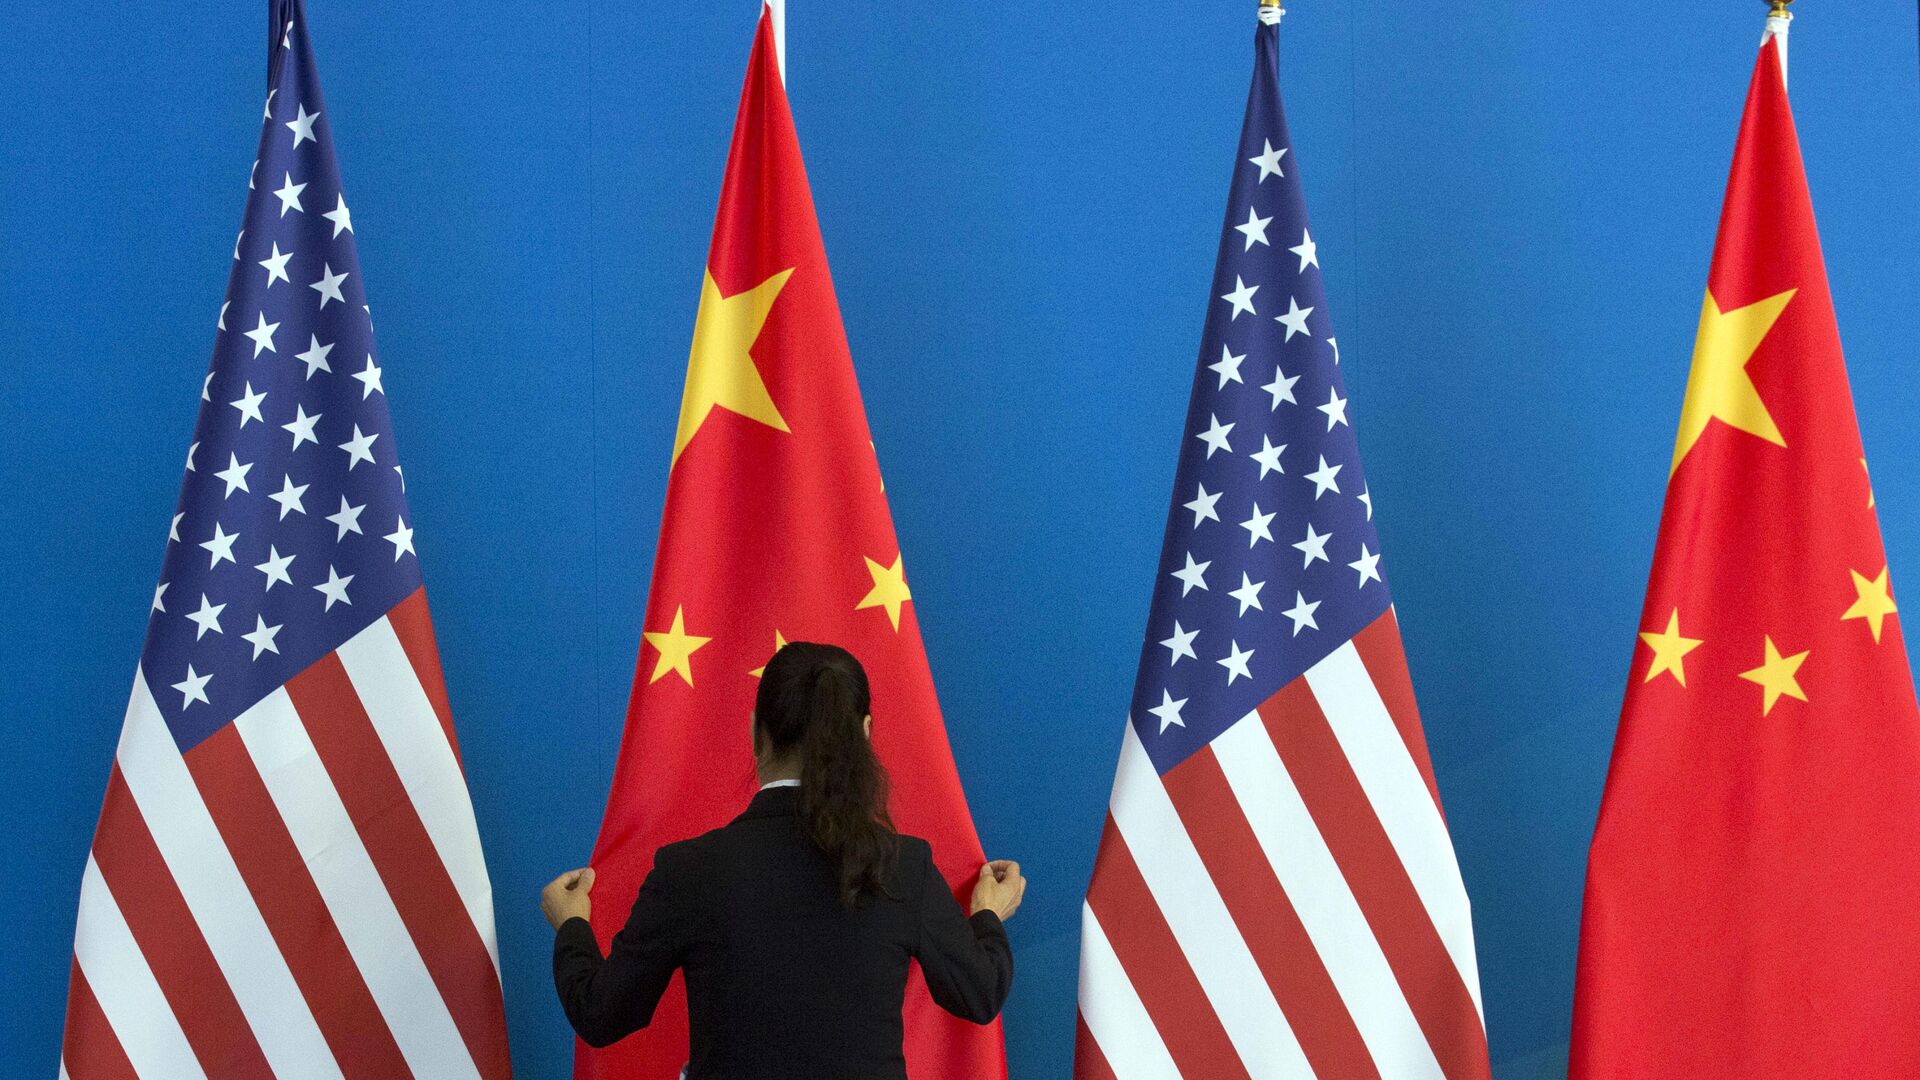 A Chinese woman adjusts the Chinese national flag near U.S. national flags before a Strategic Dialogue expanded meeting that's part of the U.S.-China Strategic and Economic Dialogue at the Diaoyutai State Guesthouse in Beijing, Thursday, July 10, 2014 - Sputnik International, 1920, 16.11.2023